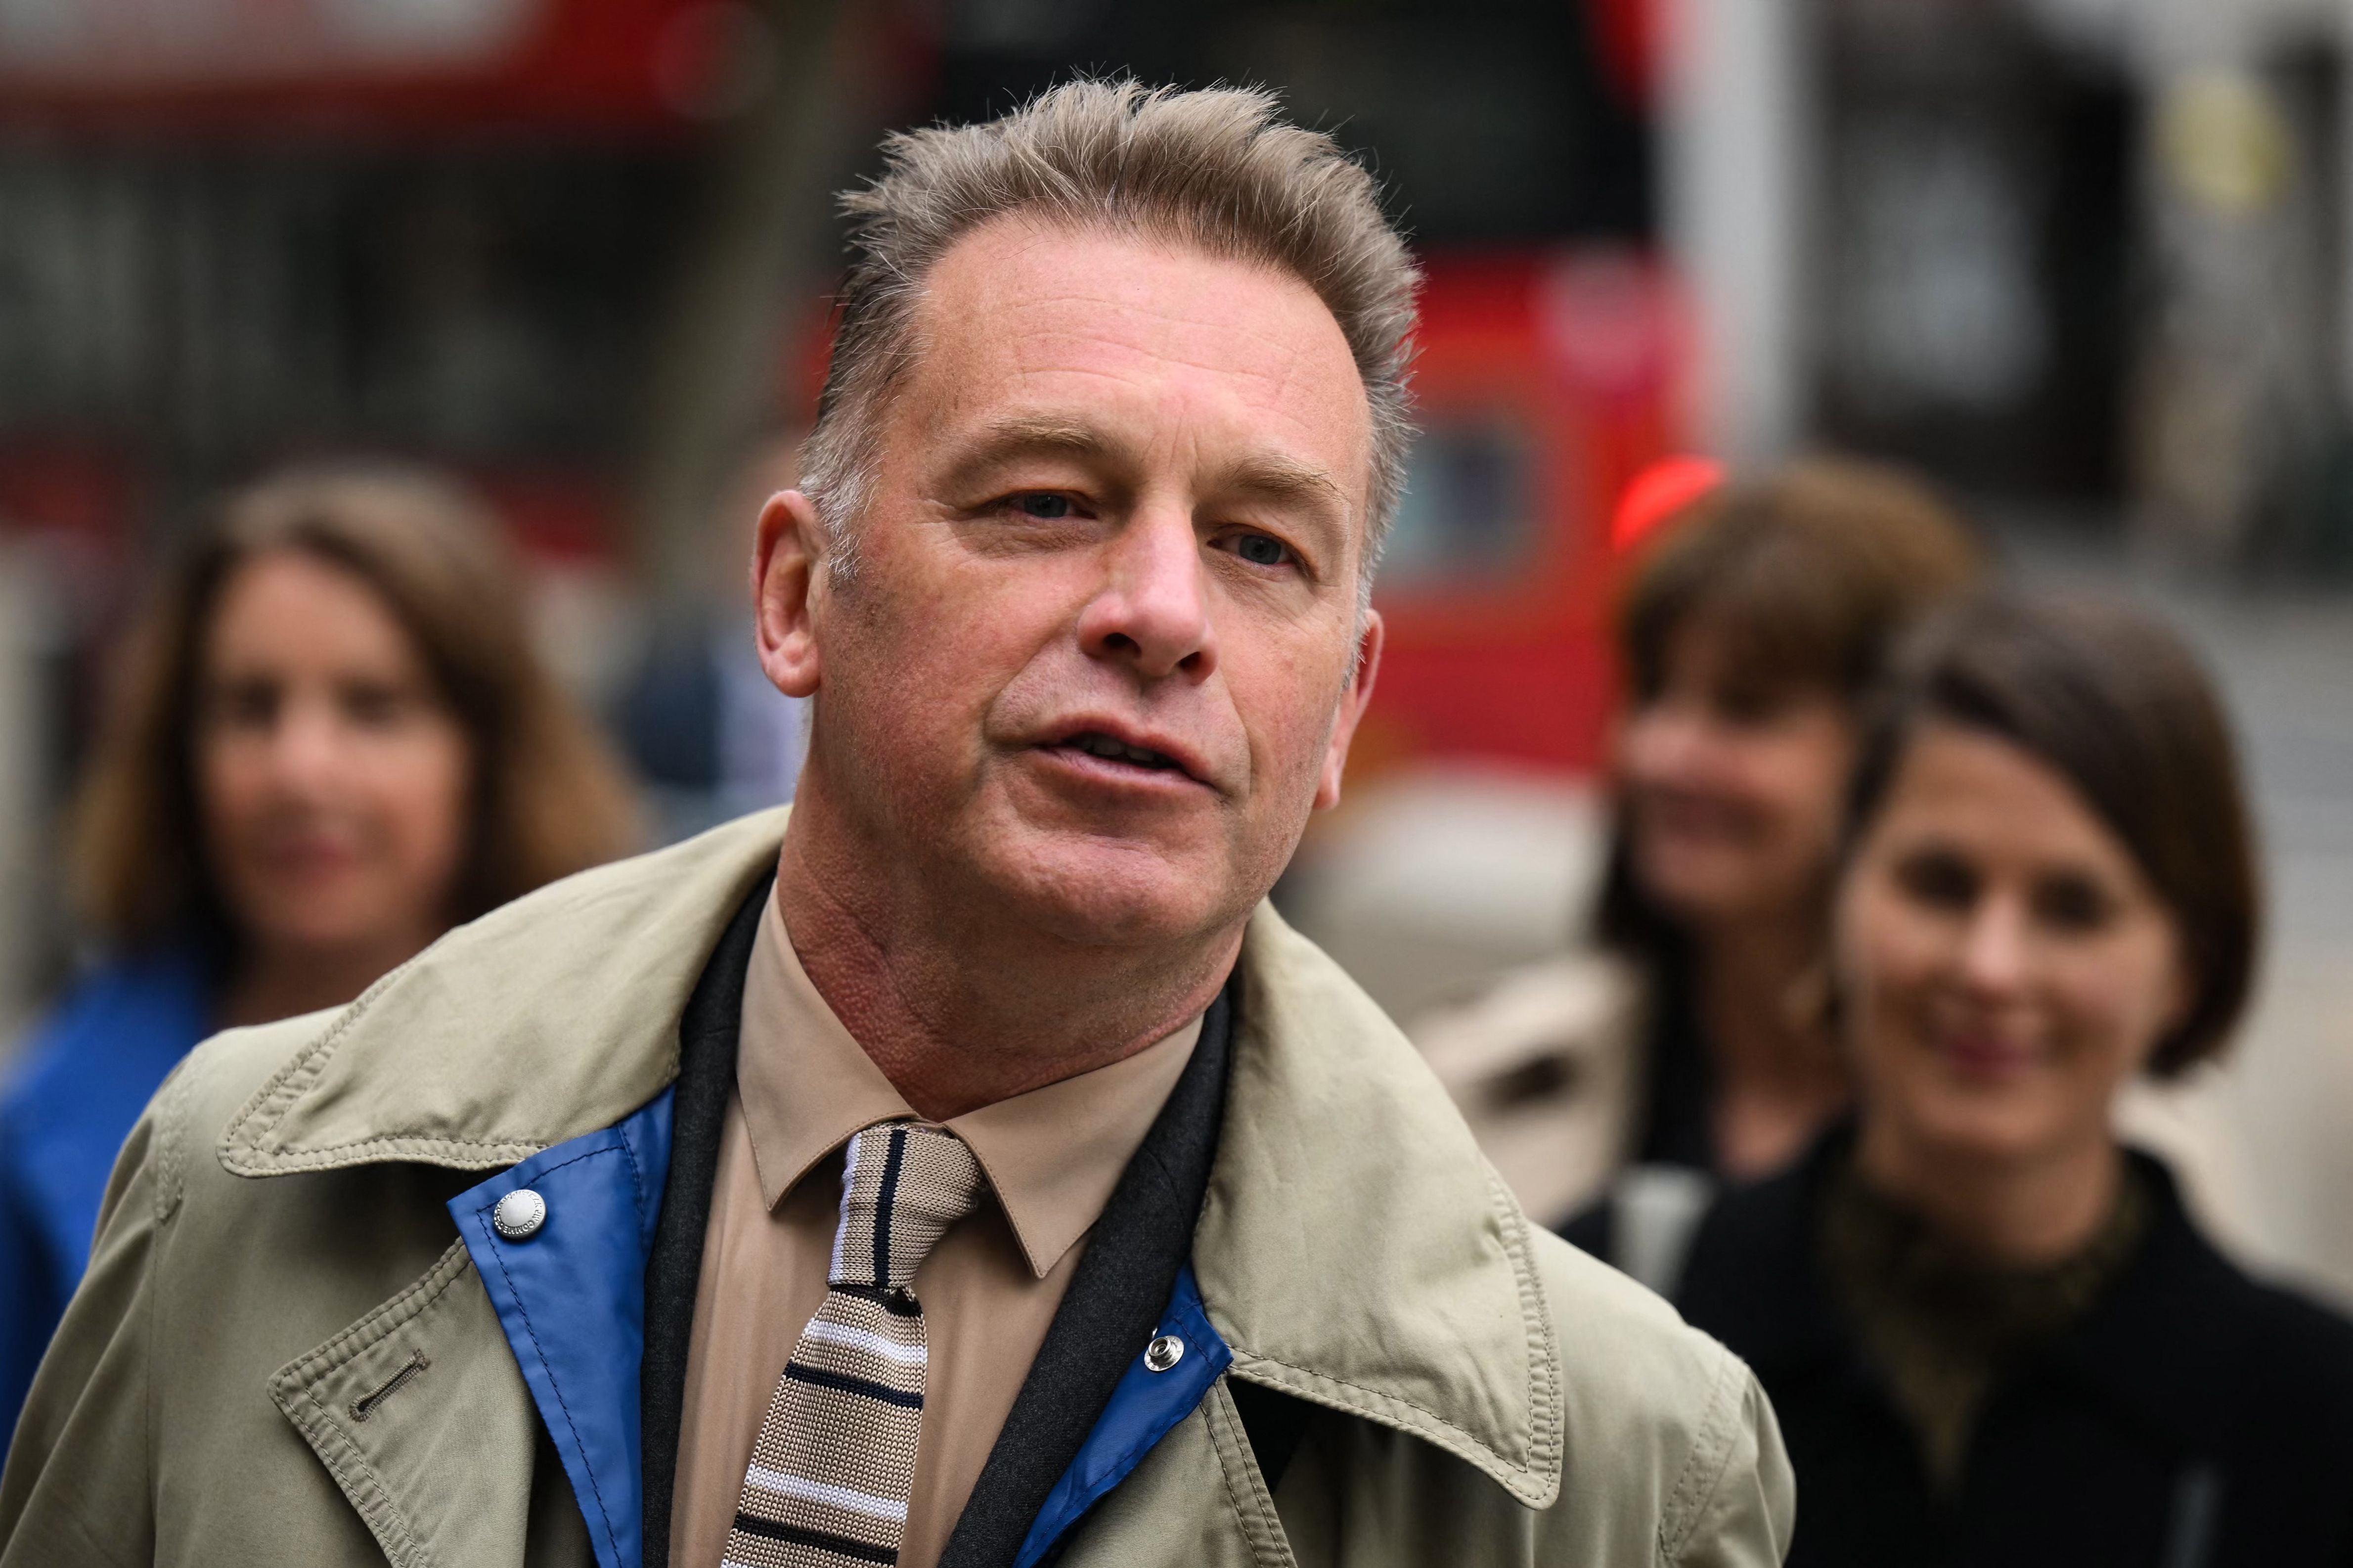 Chris Packham at the High Court on Tuesday to attend his libel trial